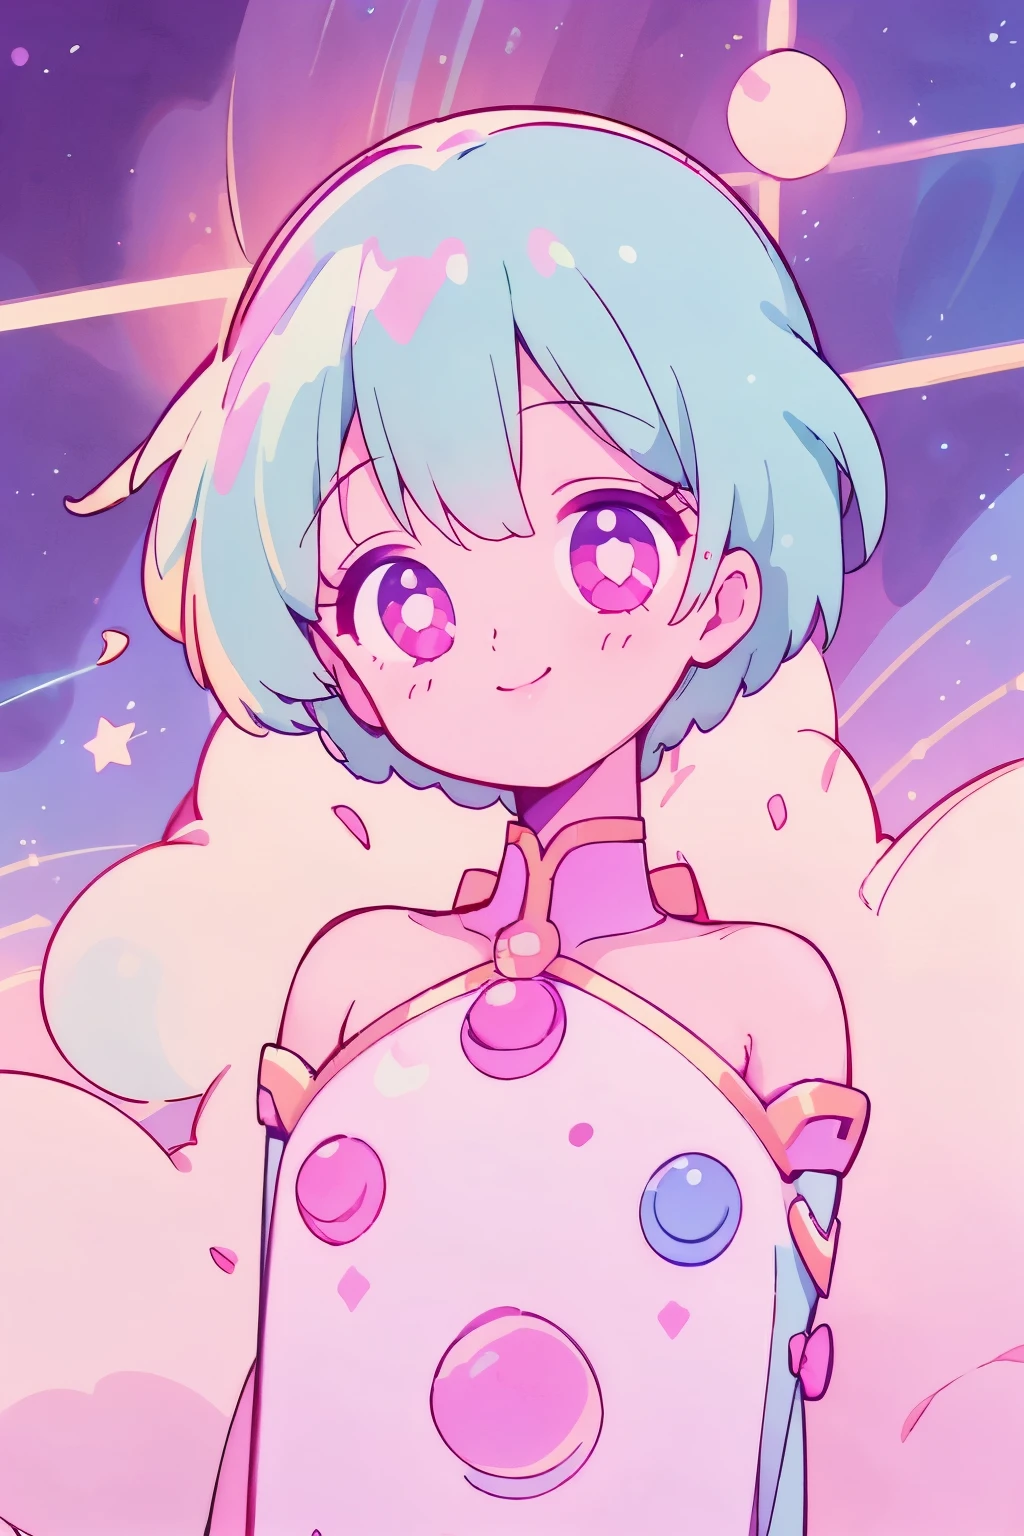 (1Girl),(Pop style,flat colors,star pattern,pastel,sparkling eyes,smiling,Cosmic atmosphere,colored lineart,outline,,Night background, macro shot,pastel night aethestic),((masterpiece))